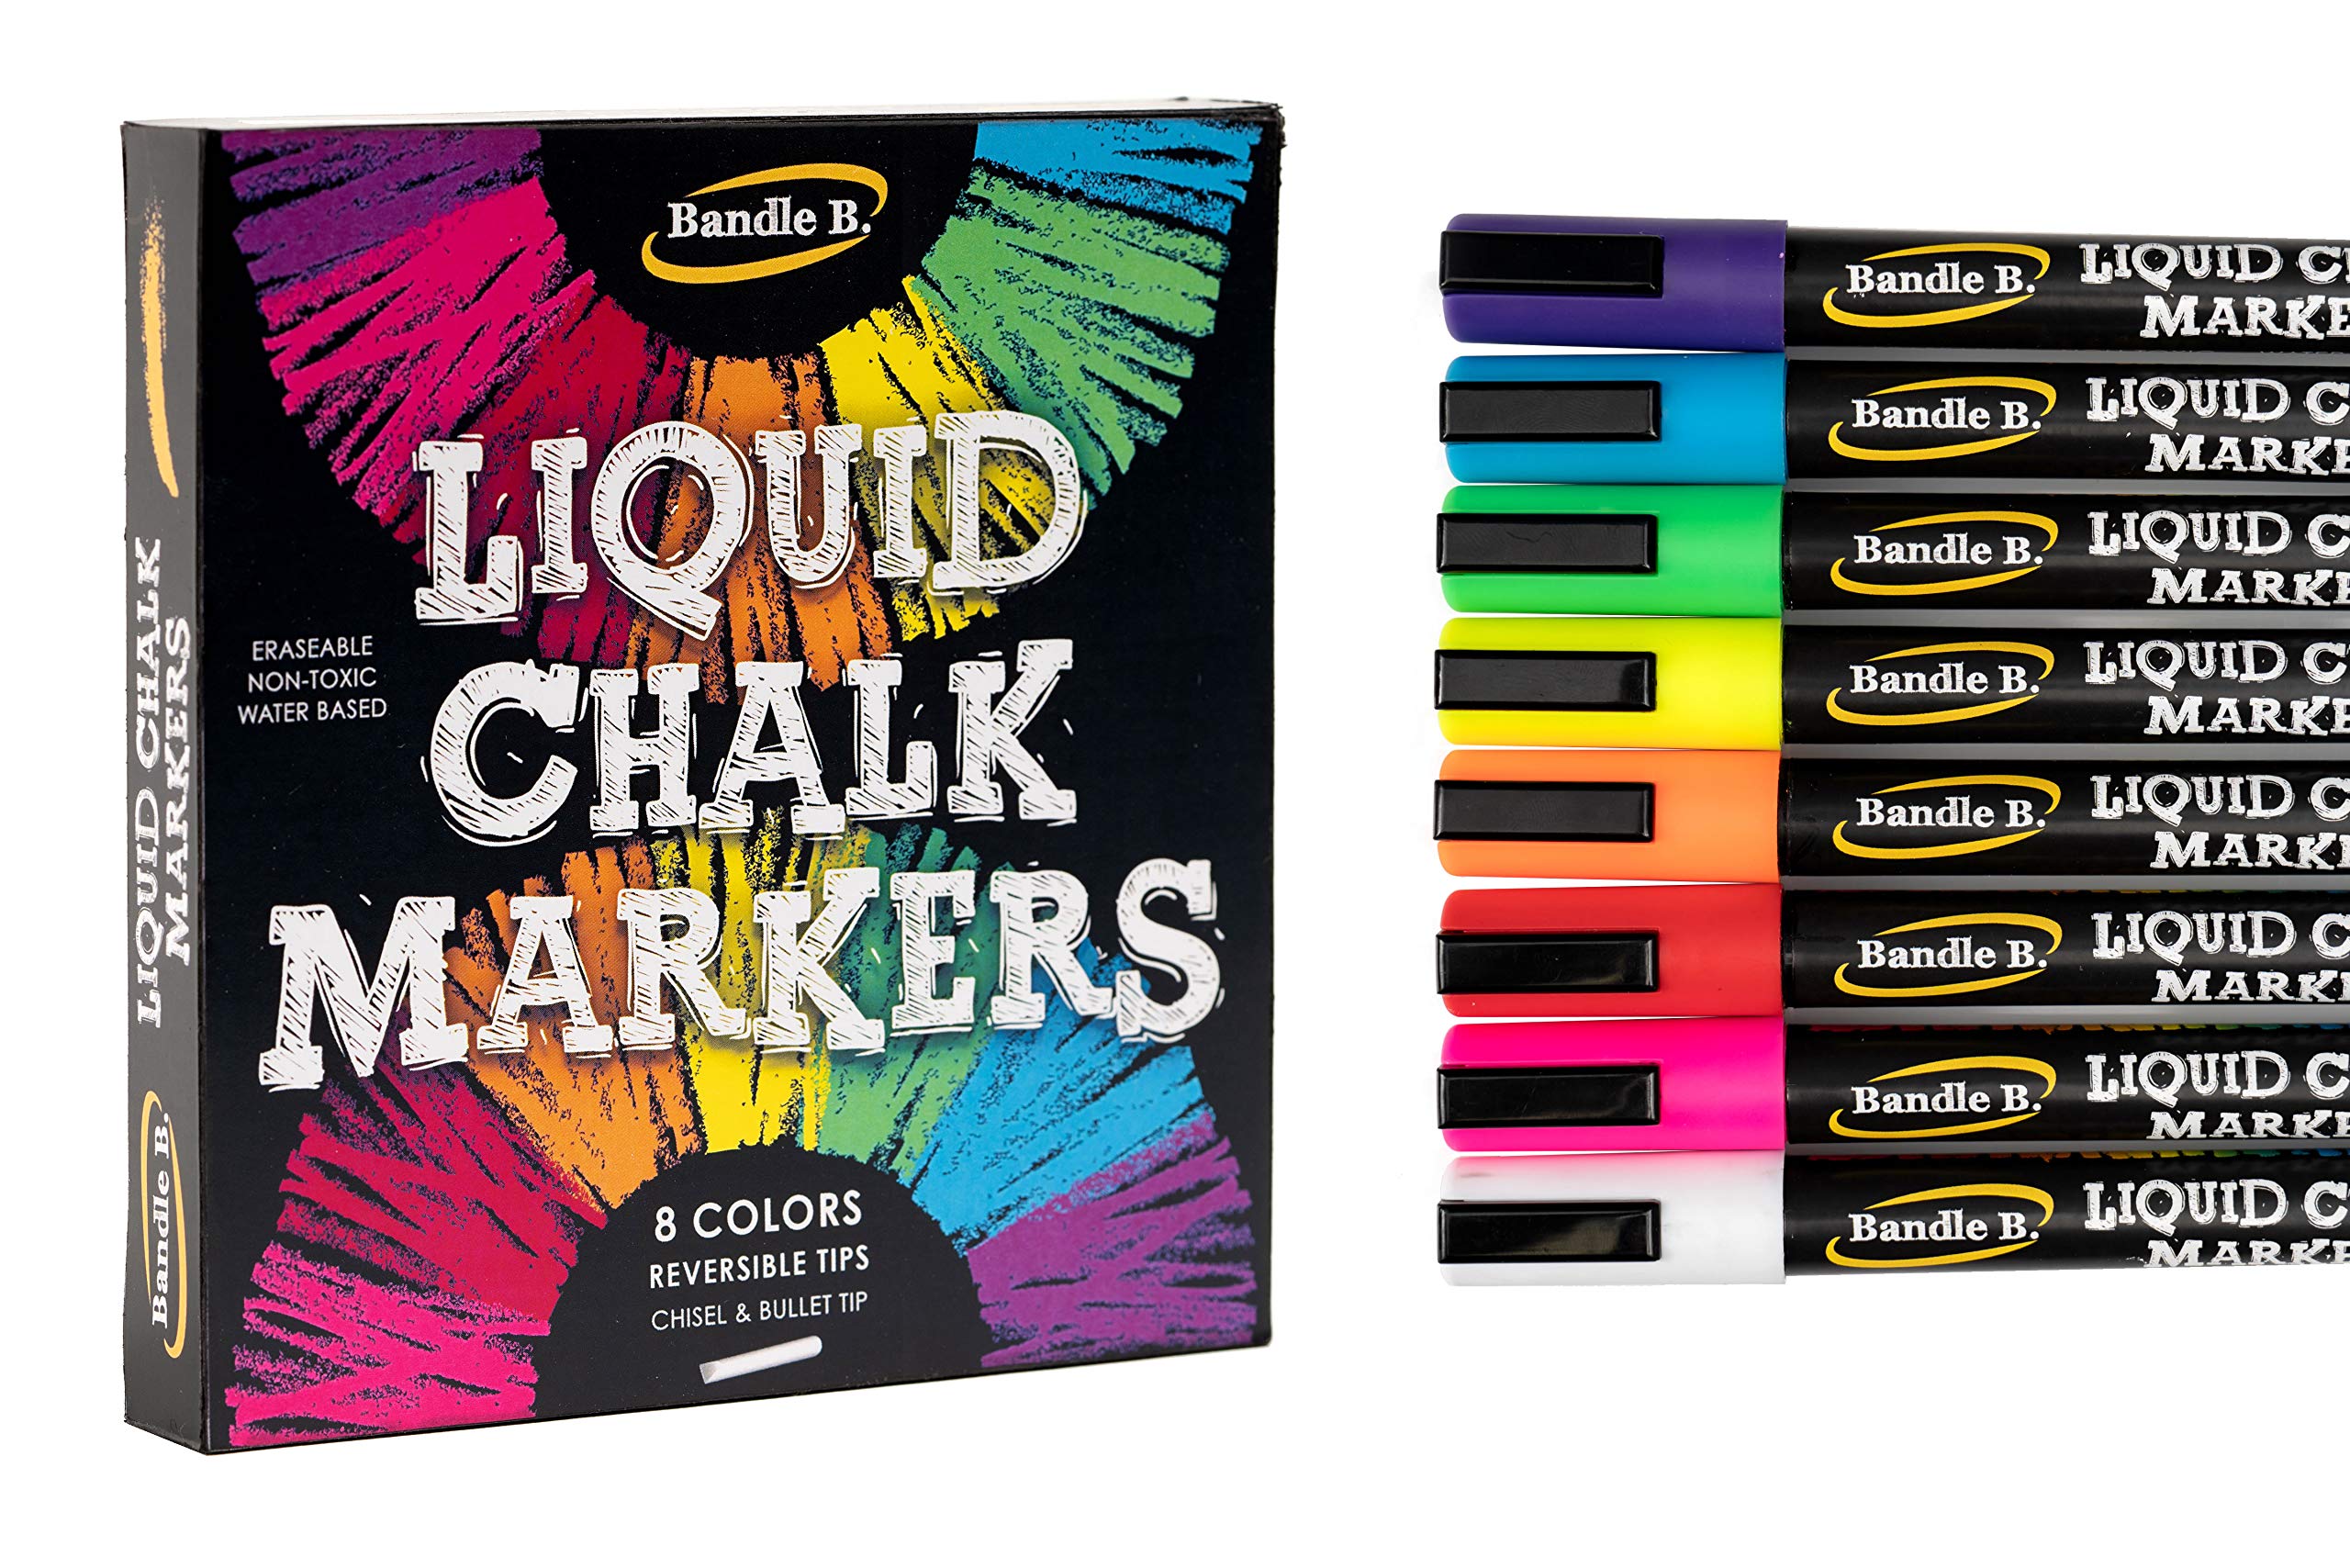 Bandle B. Chalk Markers Vibrant Liquid Chalk Pens for Chalkboard, Whiteboard, Car Window 8 Pack - image 1 of 7